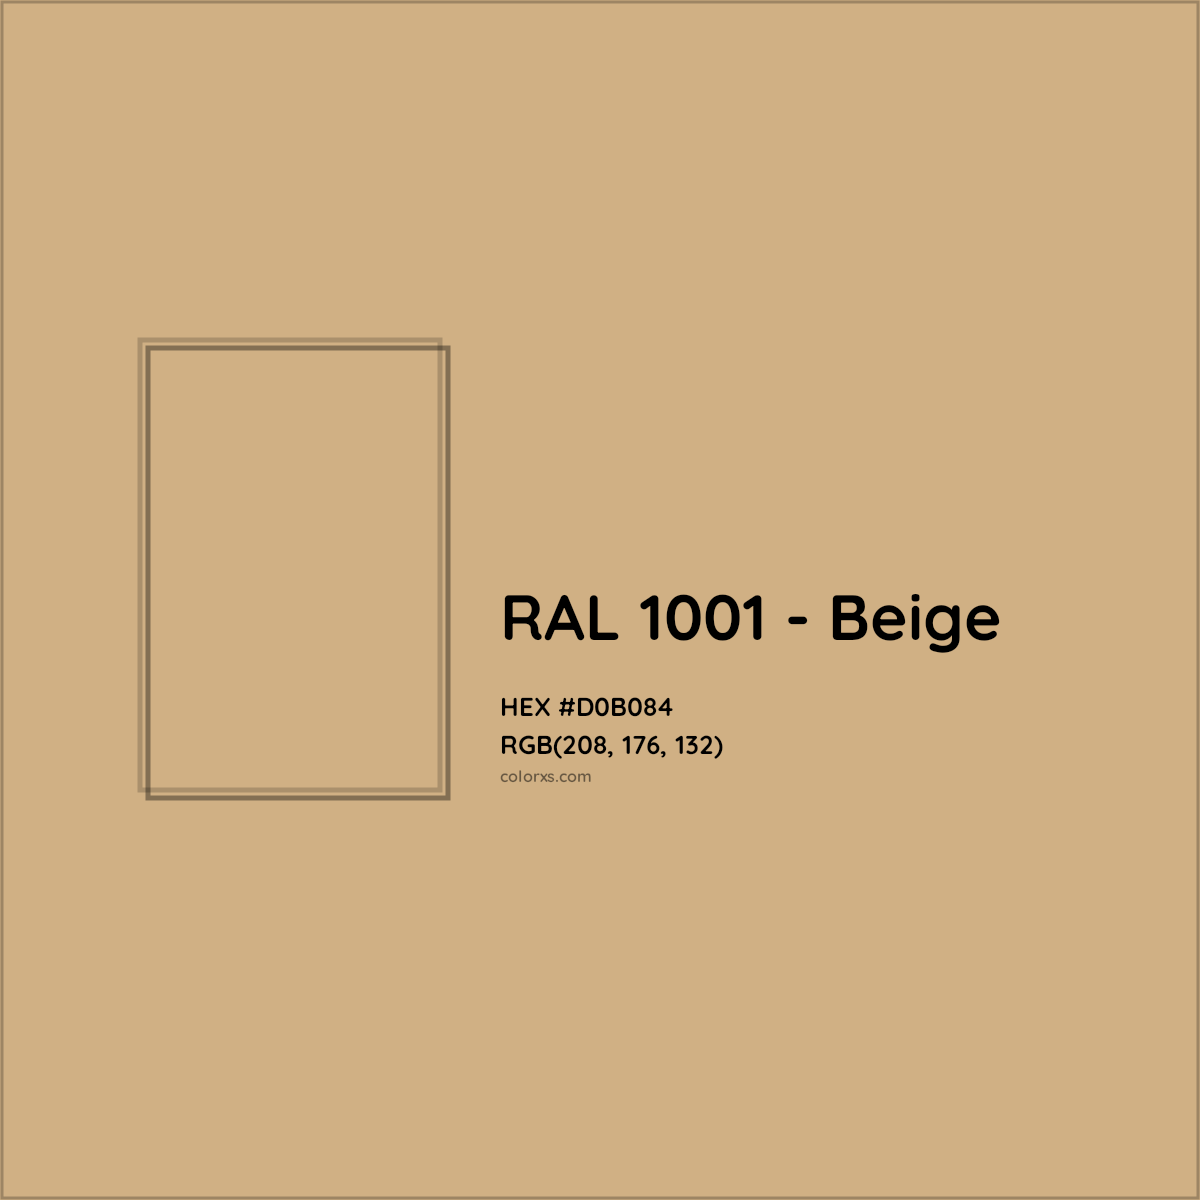 HEX #D0B084 RAL 1001 - Beige CMS RAL Classic - Color Code